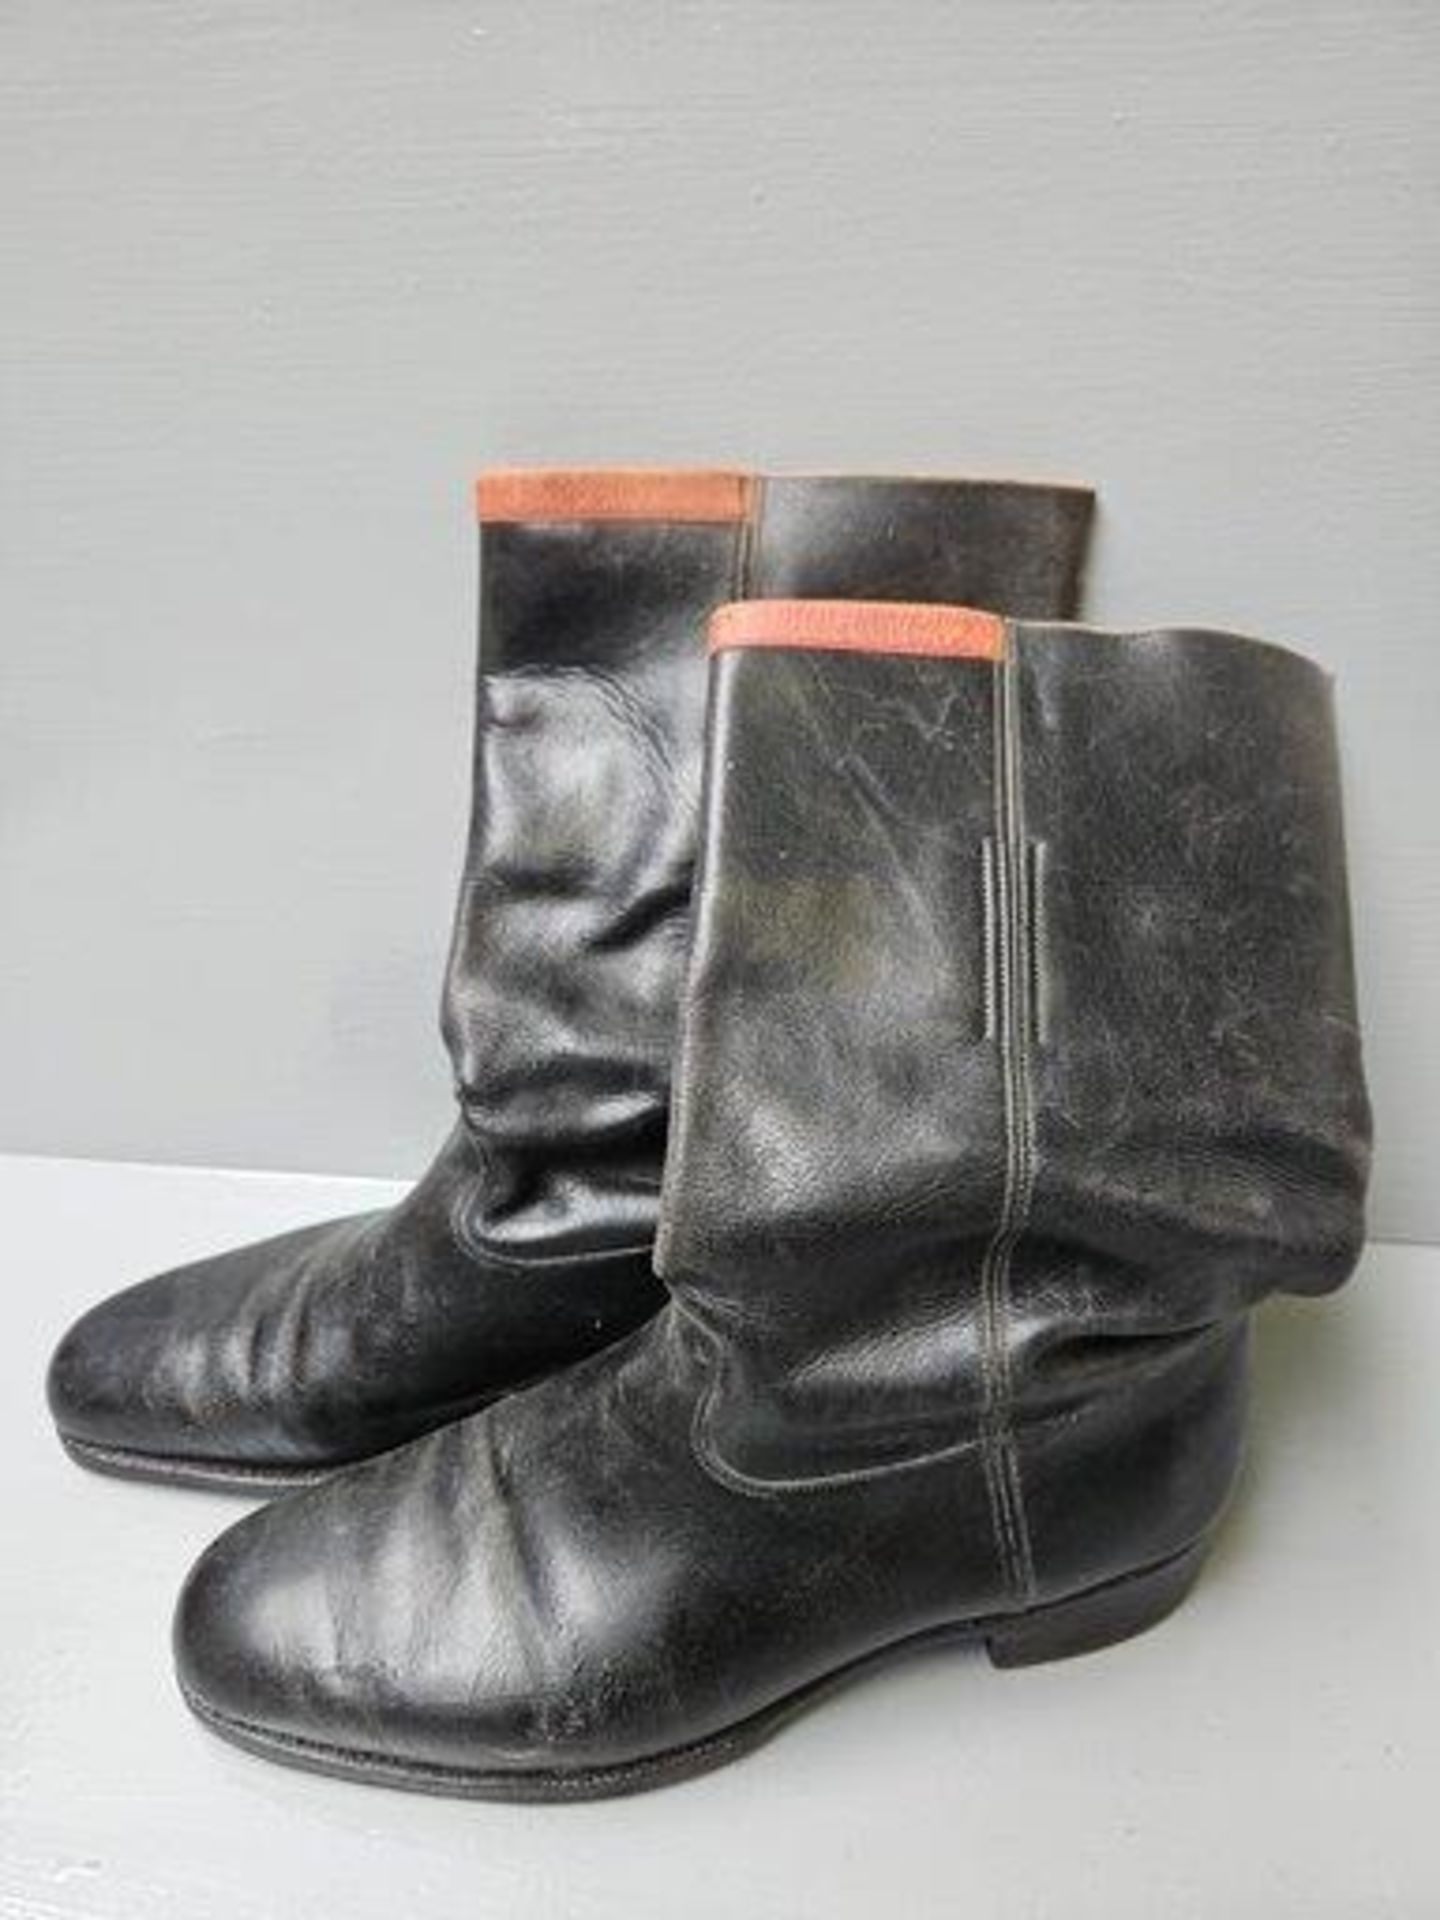 A Pair Of Black Leather Boots & Trees - Image 2 of 3